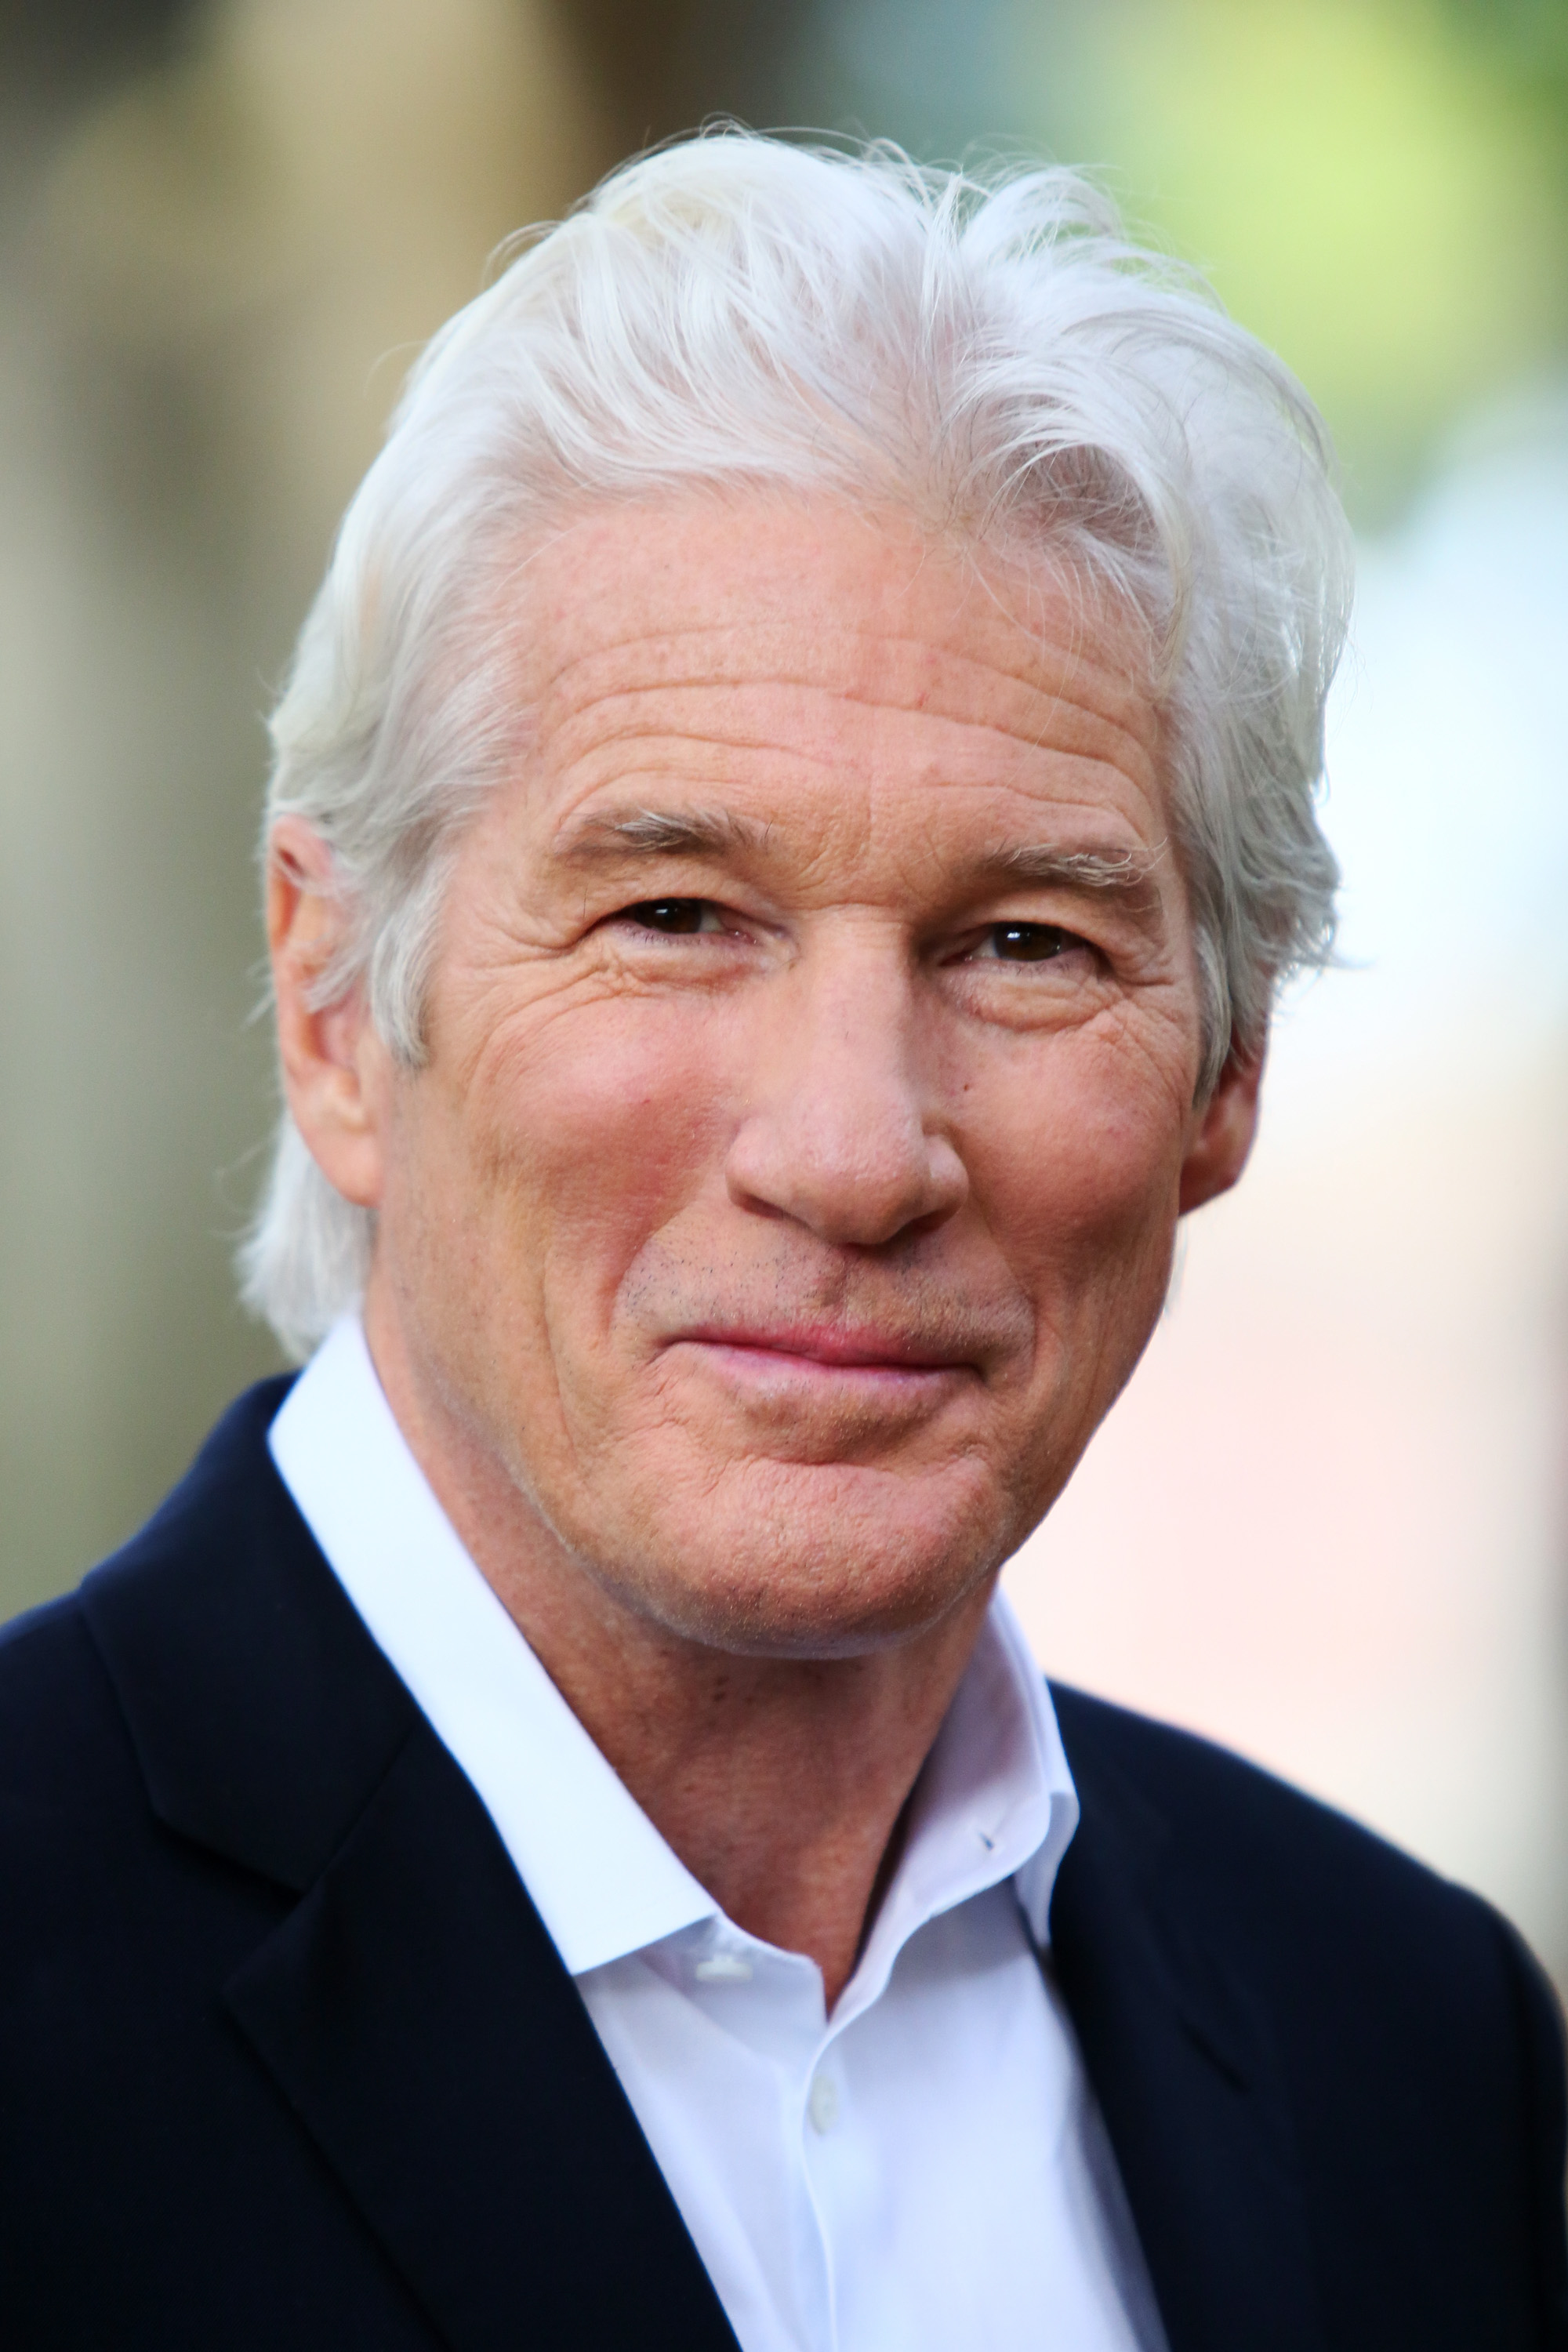 Richard Gere attends a photocall for "Franny" at La Casa Del Cinema on December 14, 2015 in Rome, Italy | Sources: Getty Images